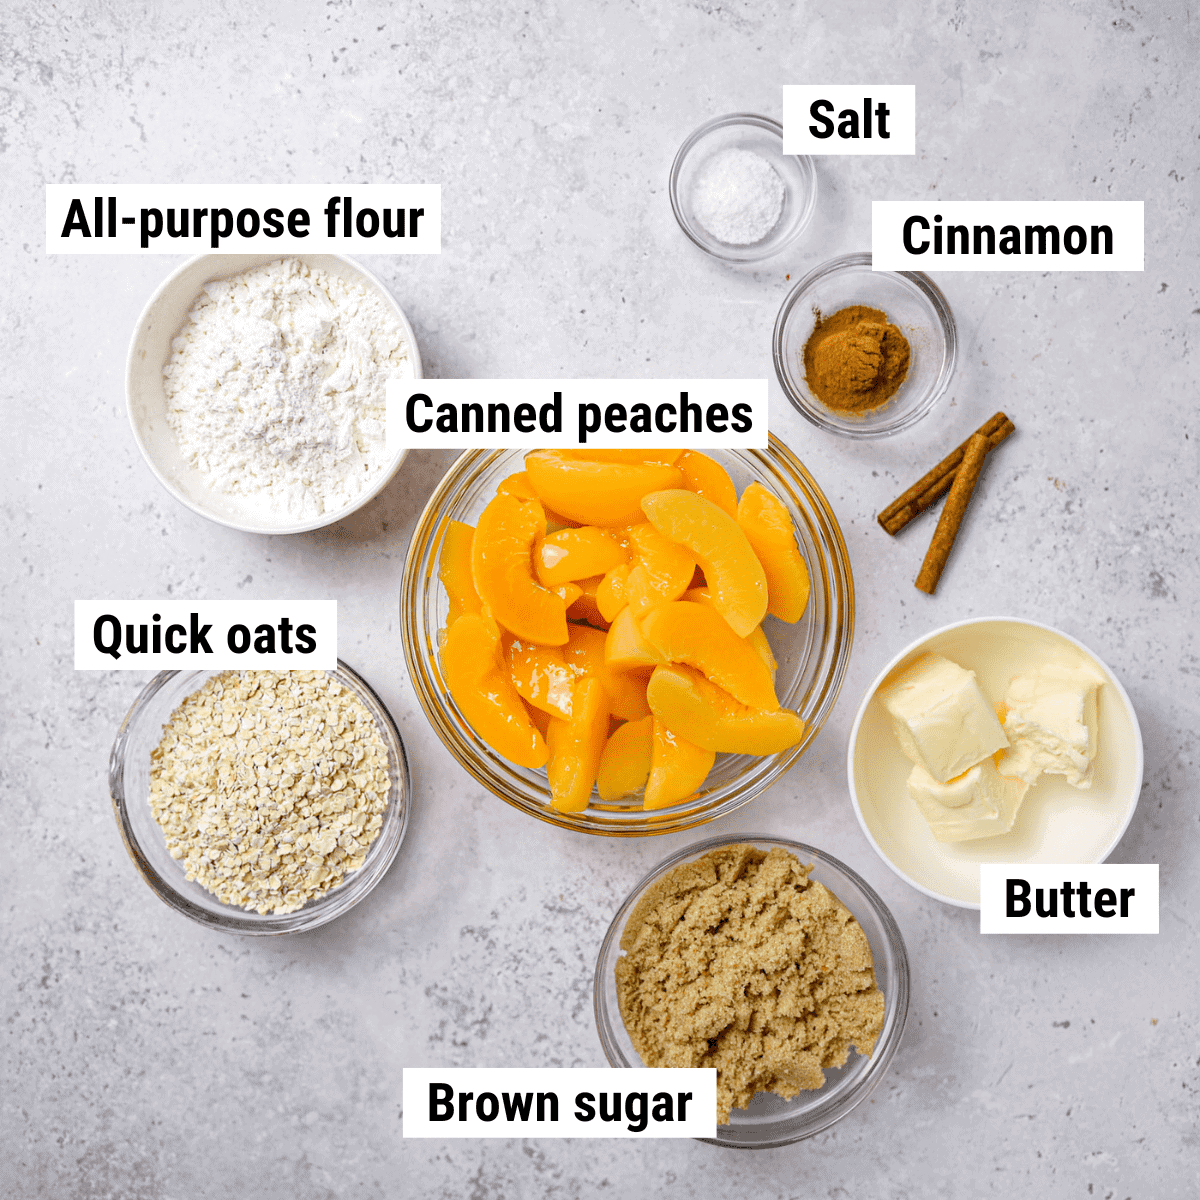 The ingredients to make peach crisp with canned peaches spread out on a table.